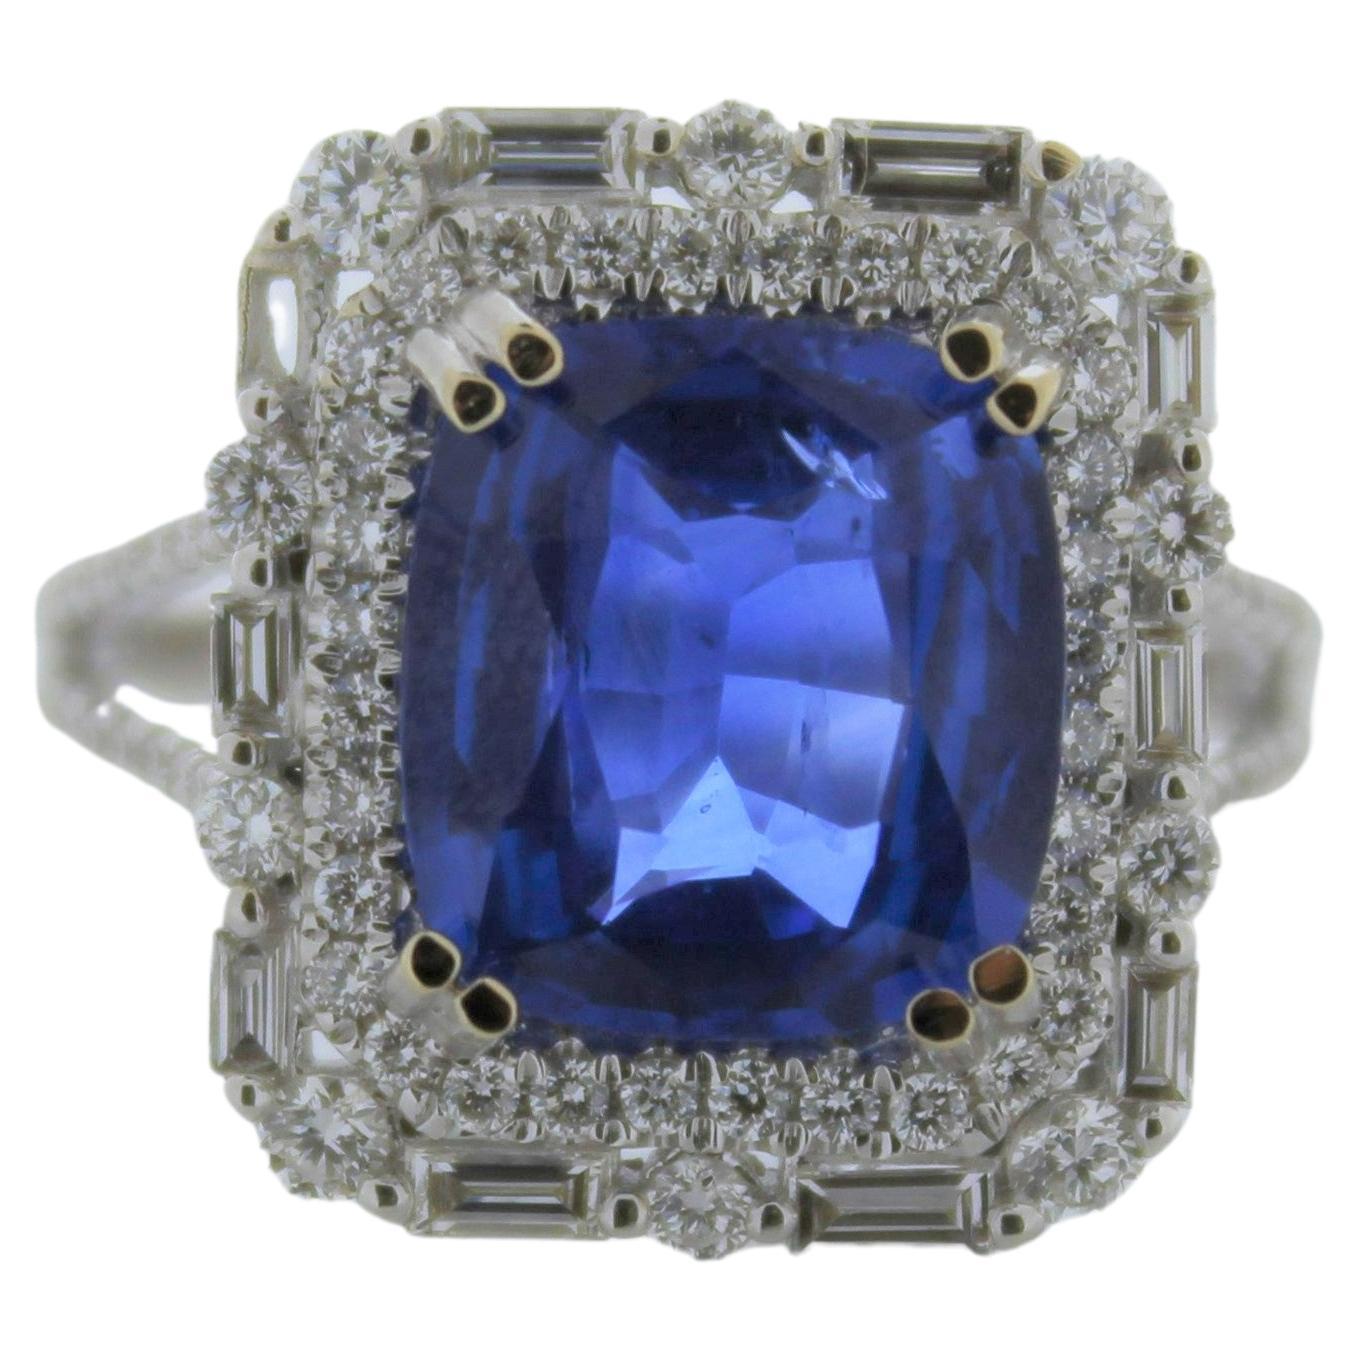 4.53ctw Blue Sapphire Cushion and 1.85ctw Diamond Ring in 18k White Gold